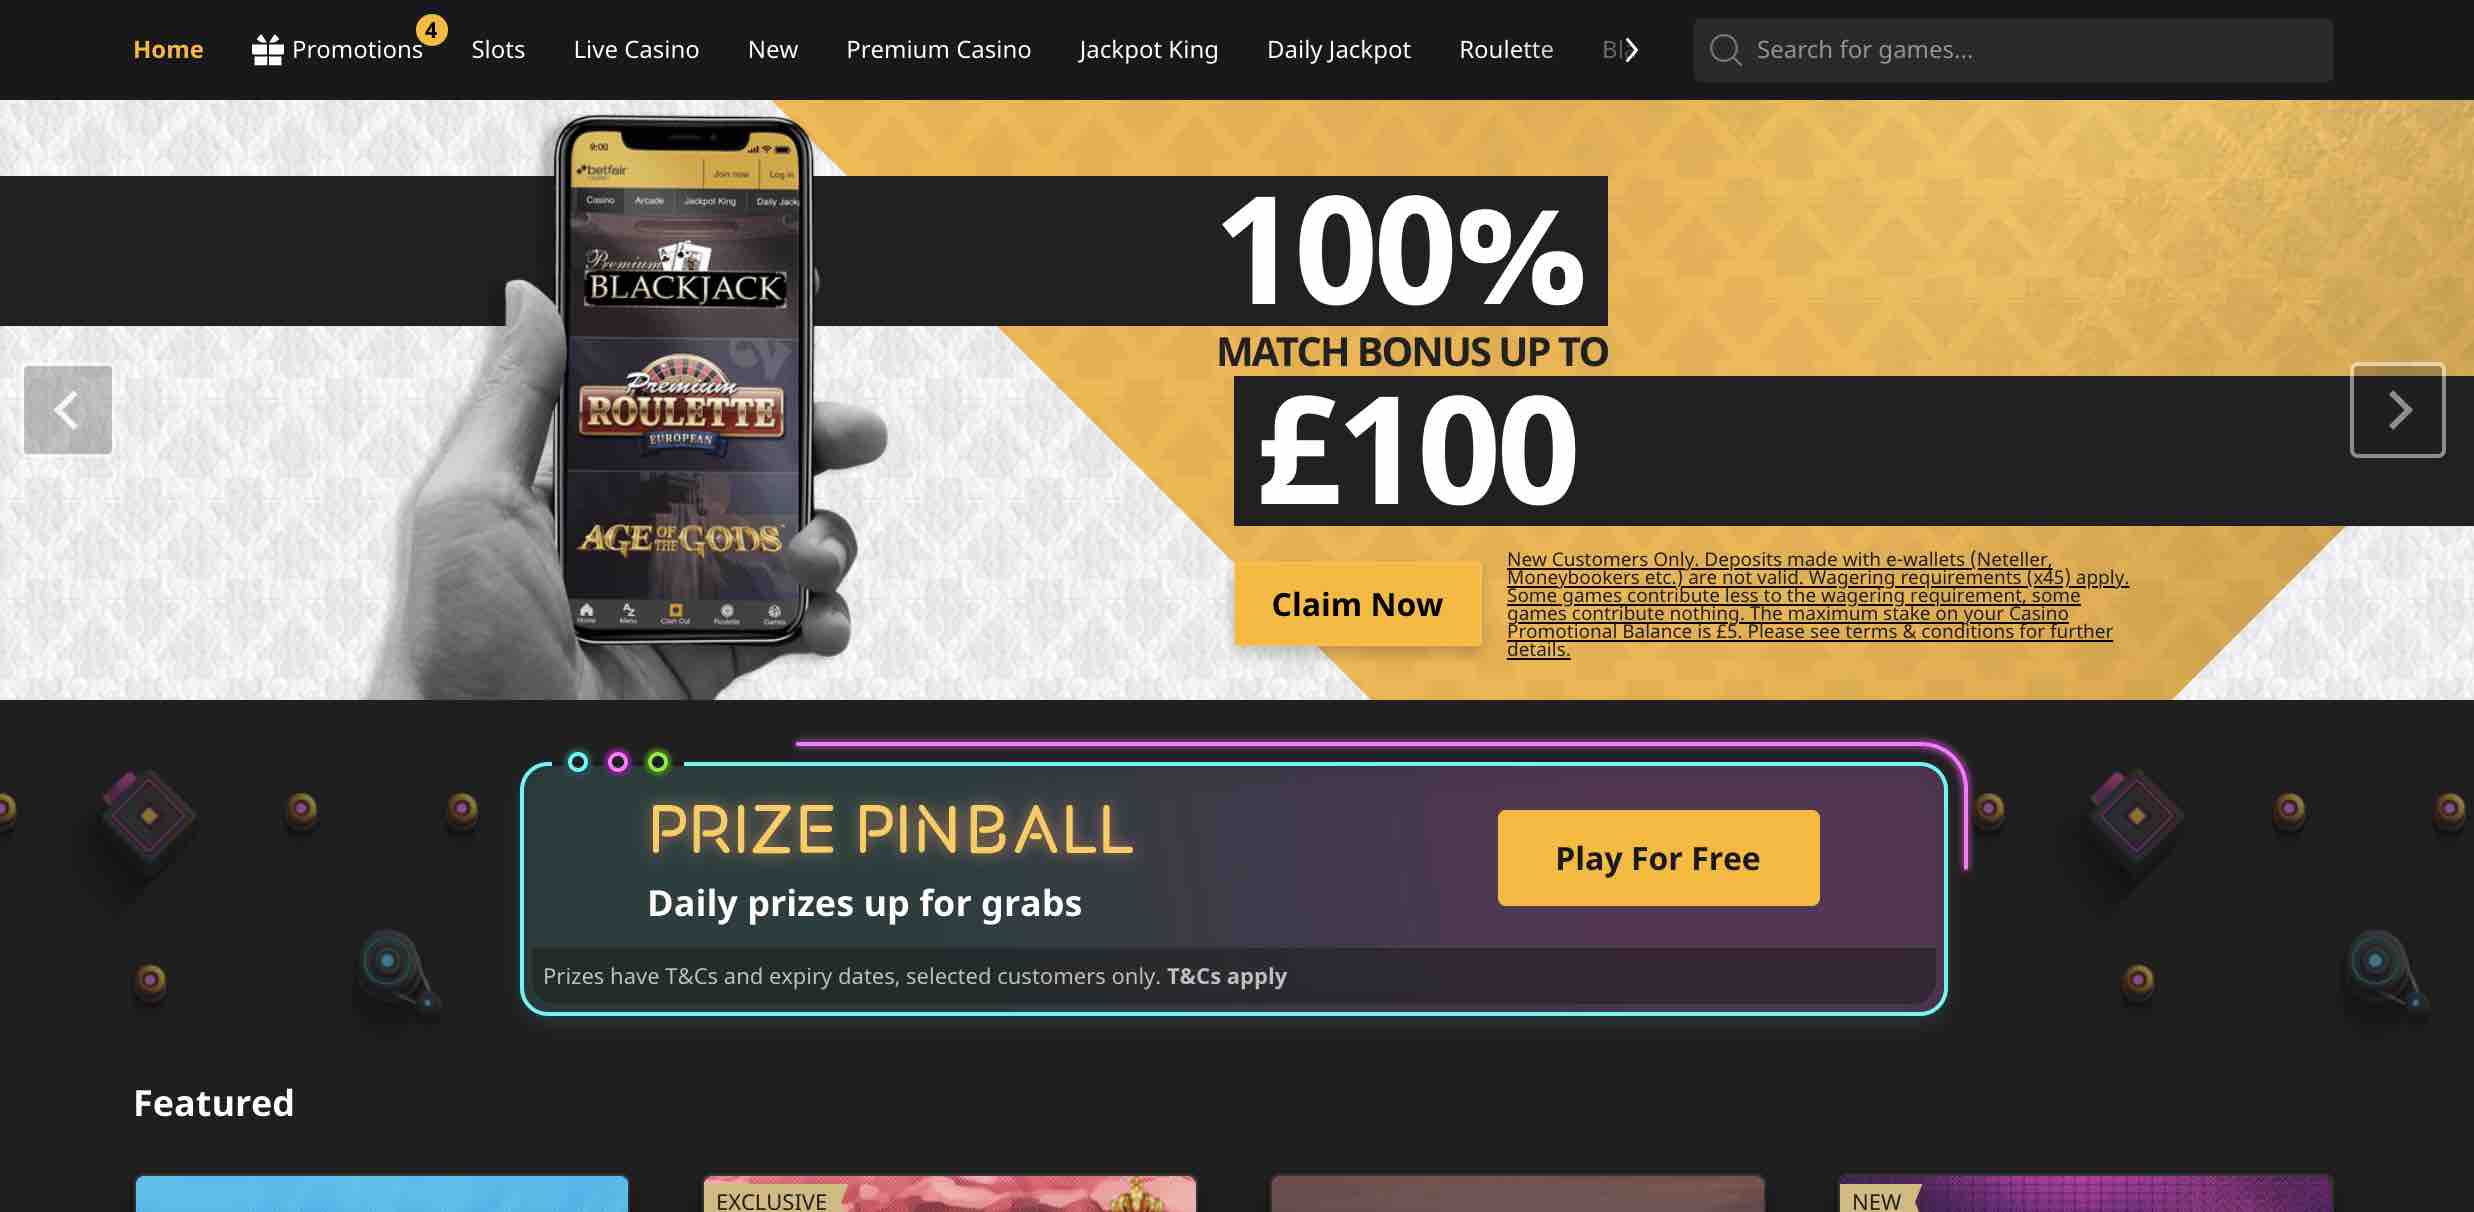 Get up to £100 at Betfair Casino